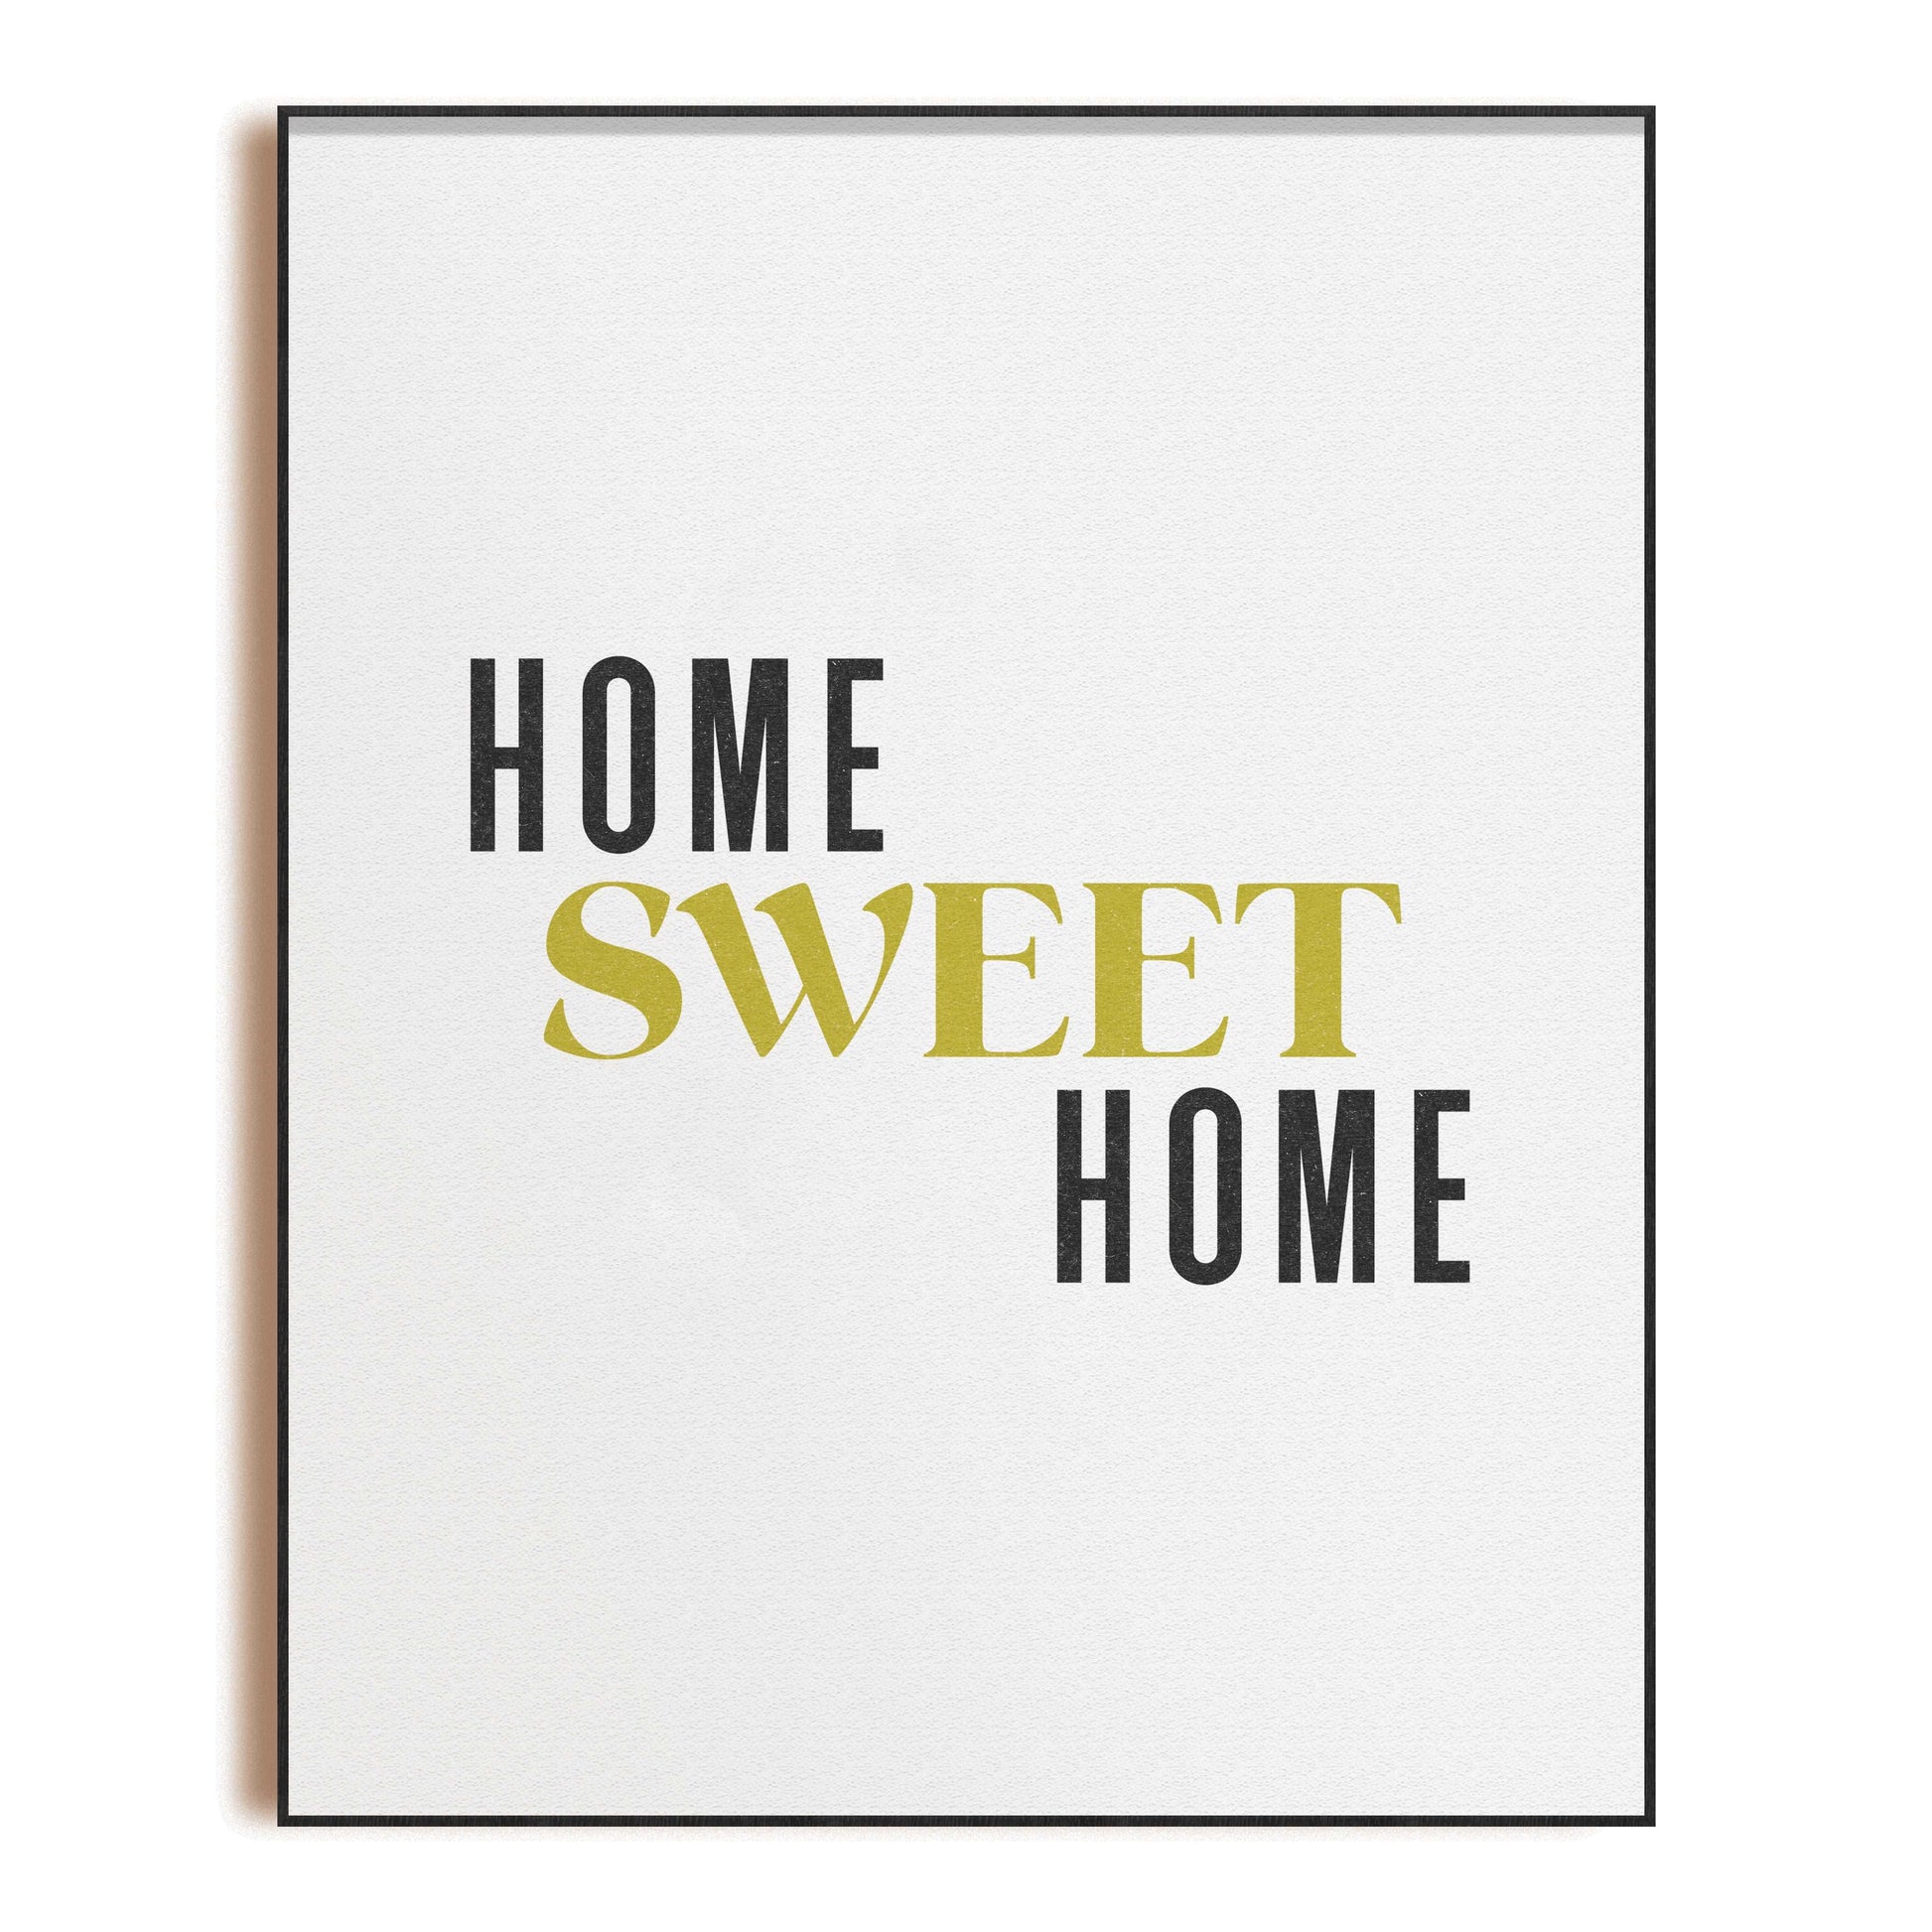 Home Sweet Home Art Print | Unframed 8x10 Typographic Quote 8x10 Wall Decor Sign